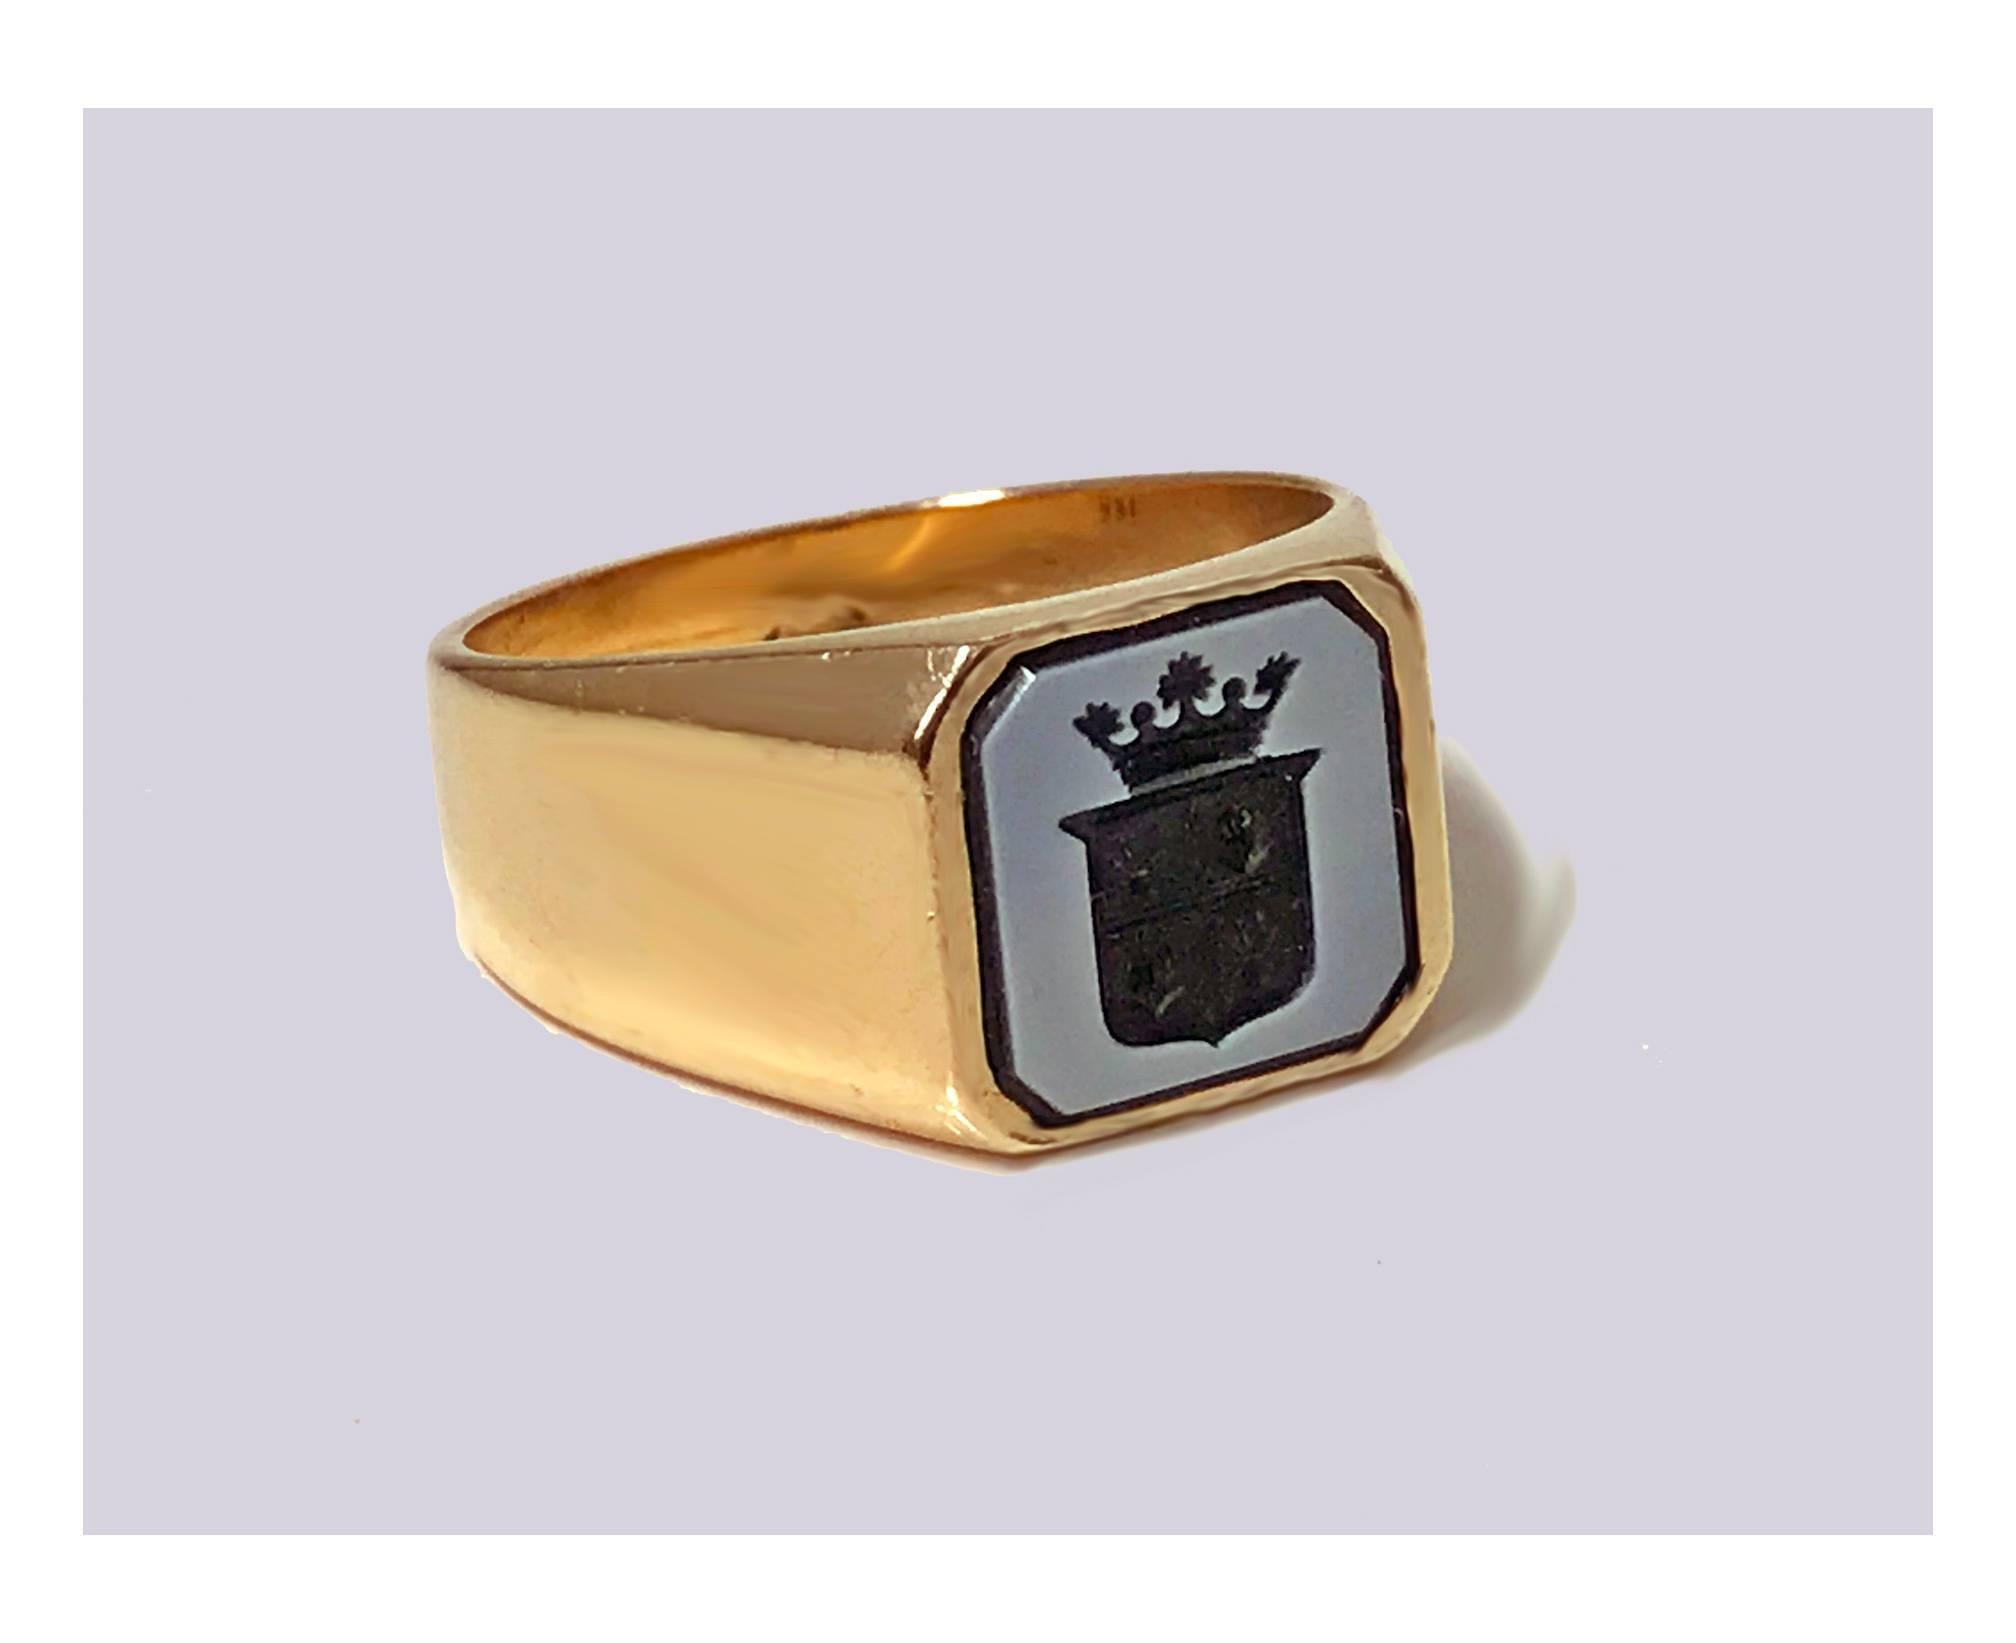 Antique Gold Sardonyx Ring, C.1890. Wonderful engraved coat of arms and coronet above, approximately 10.05 mm square, plain polished gold taperd mount. Stamped 14K. Ring Size: 10.75. May be sized. Item Weight: 11.46 grams. 